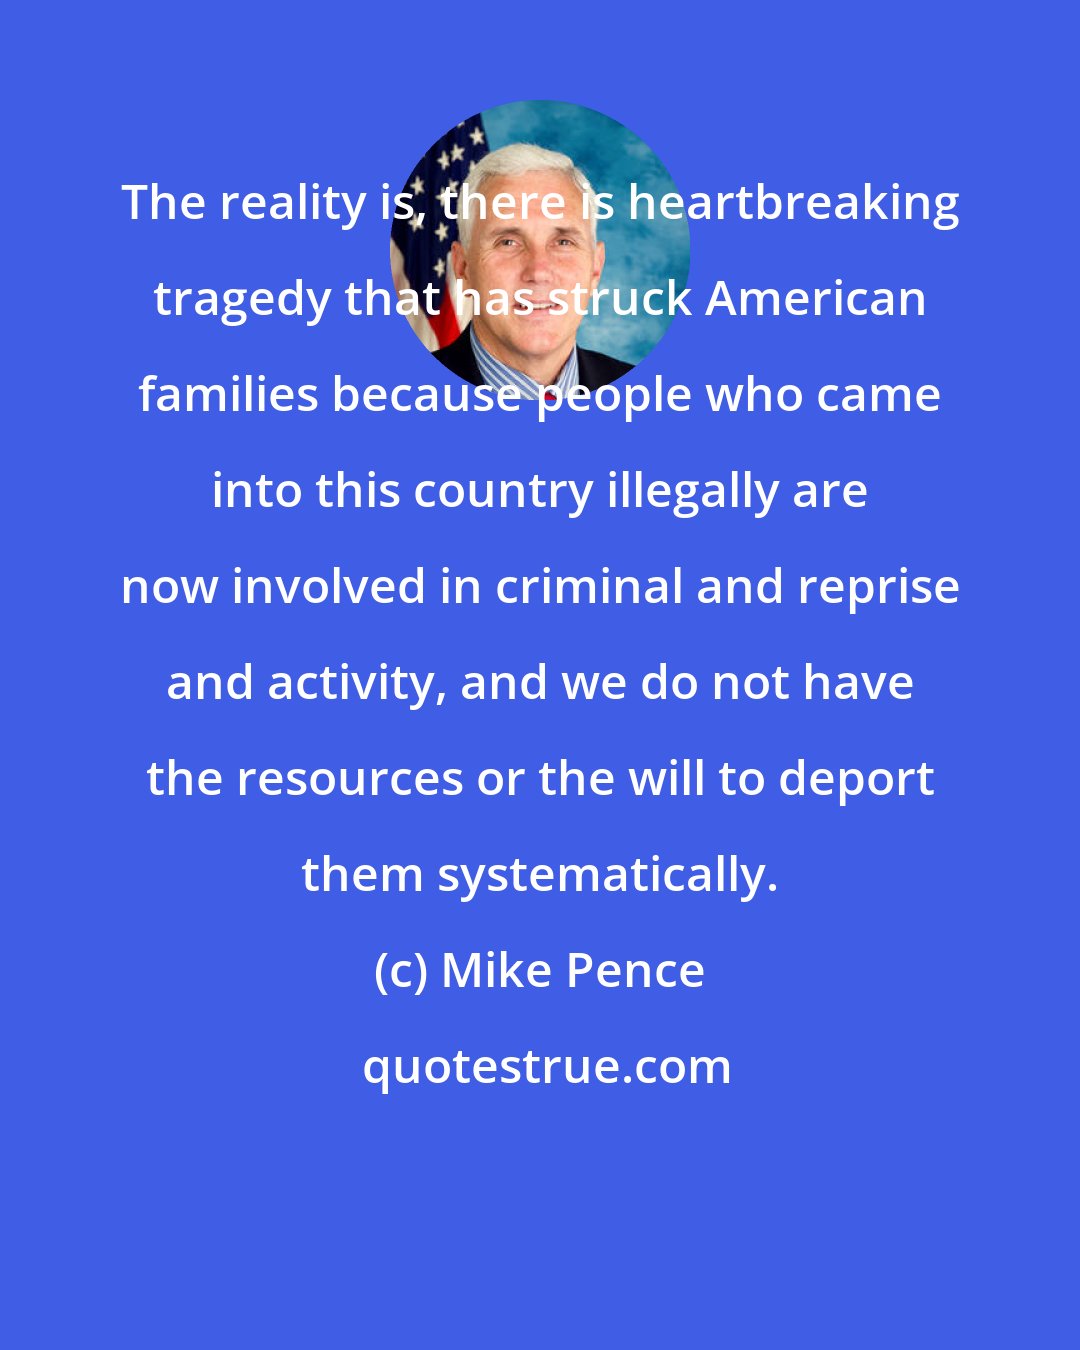 Mike Pence: The reality is, there is heartbreaking tragedy that has struck American families because people who came into this country illegally are now involved in criminal and reprise and activity, and we do not have the resources or the will to deport them systematically.